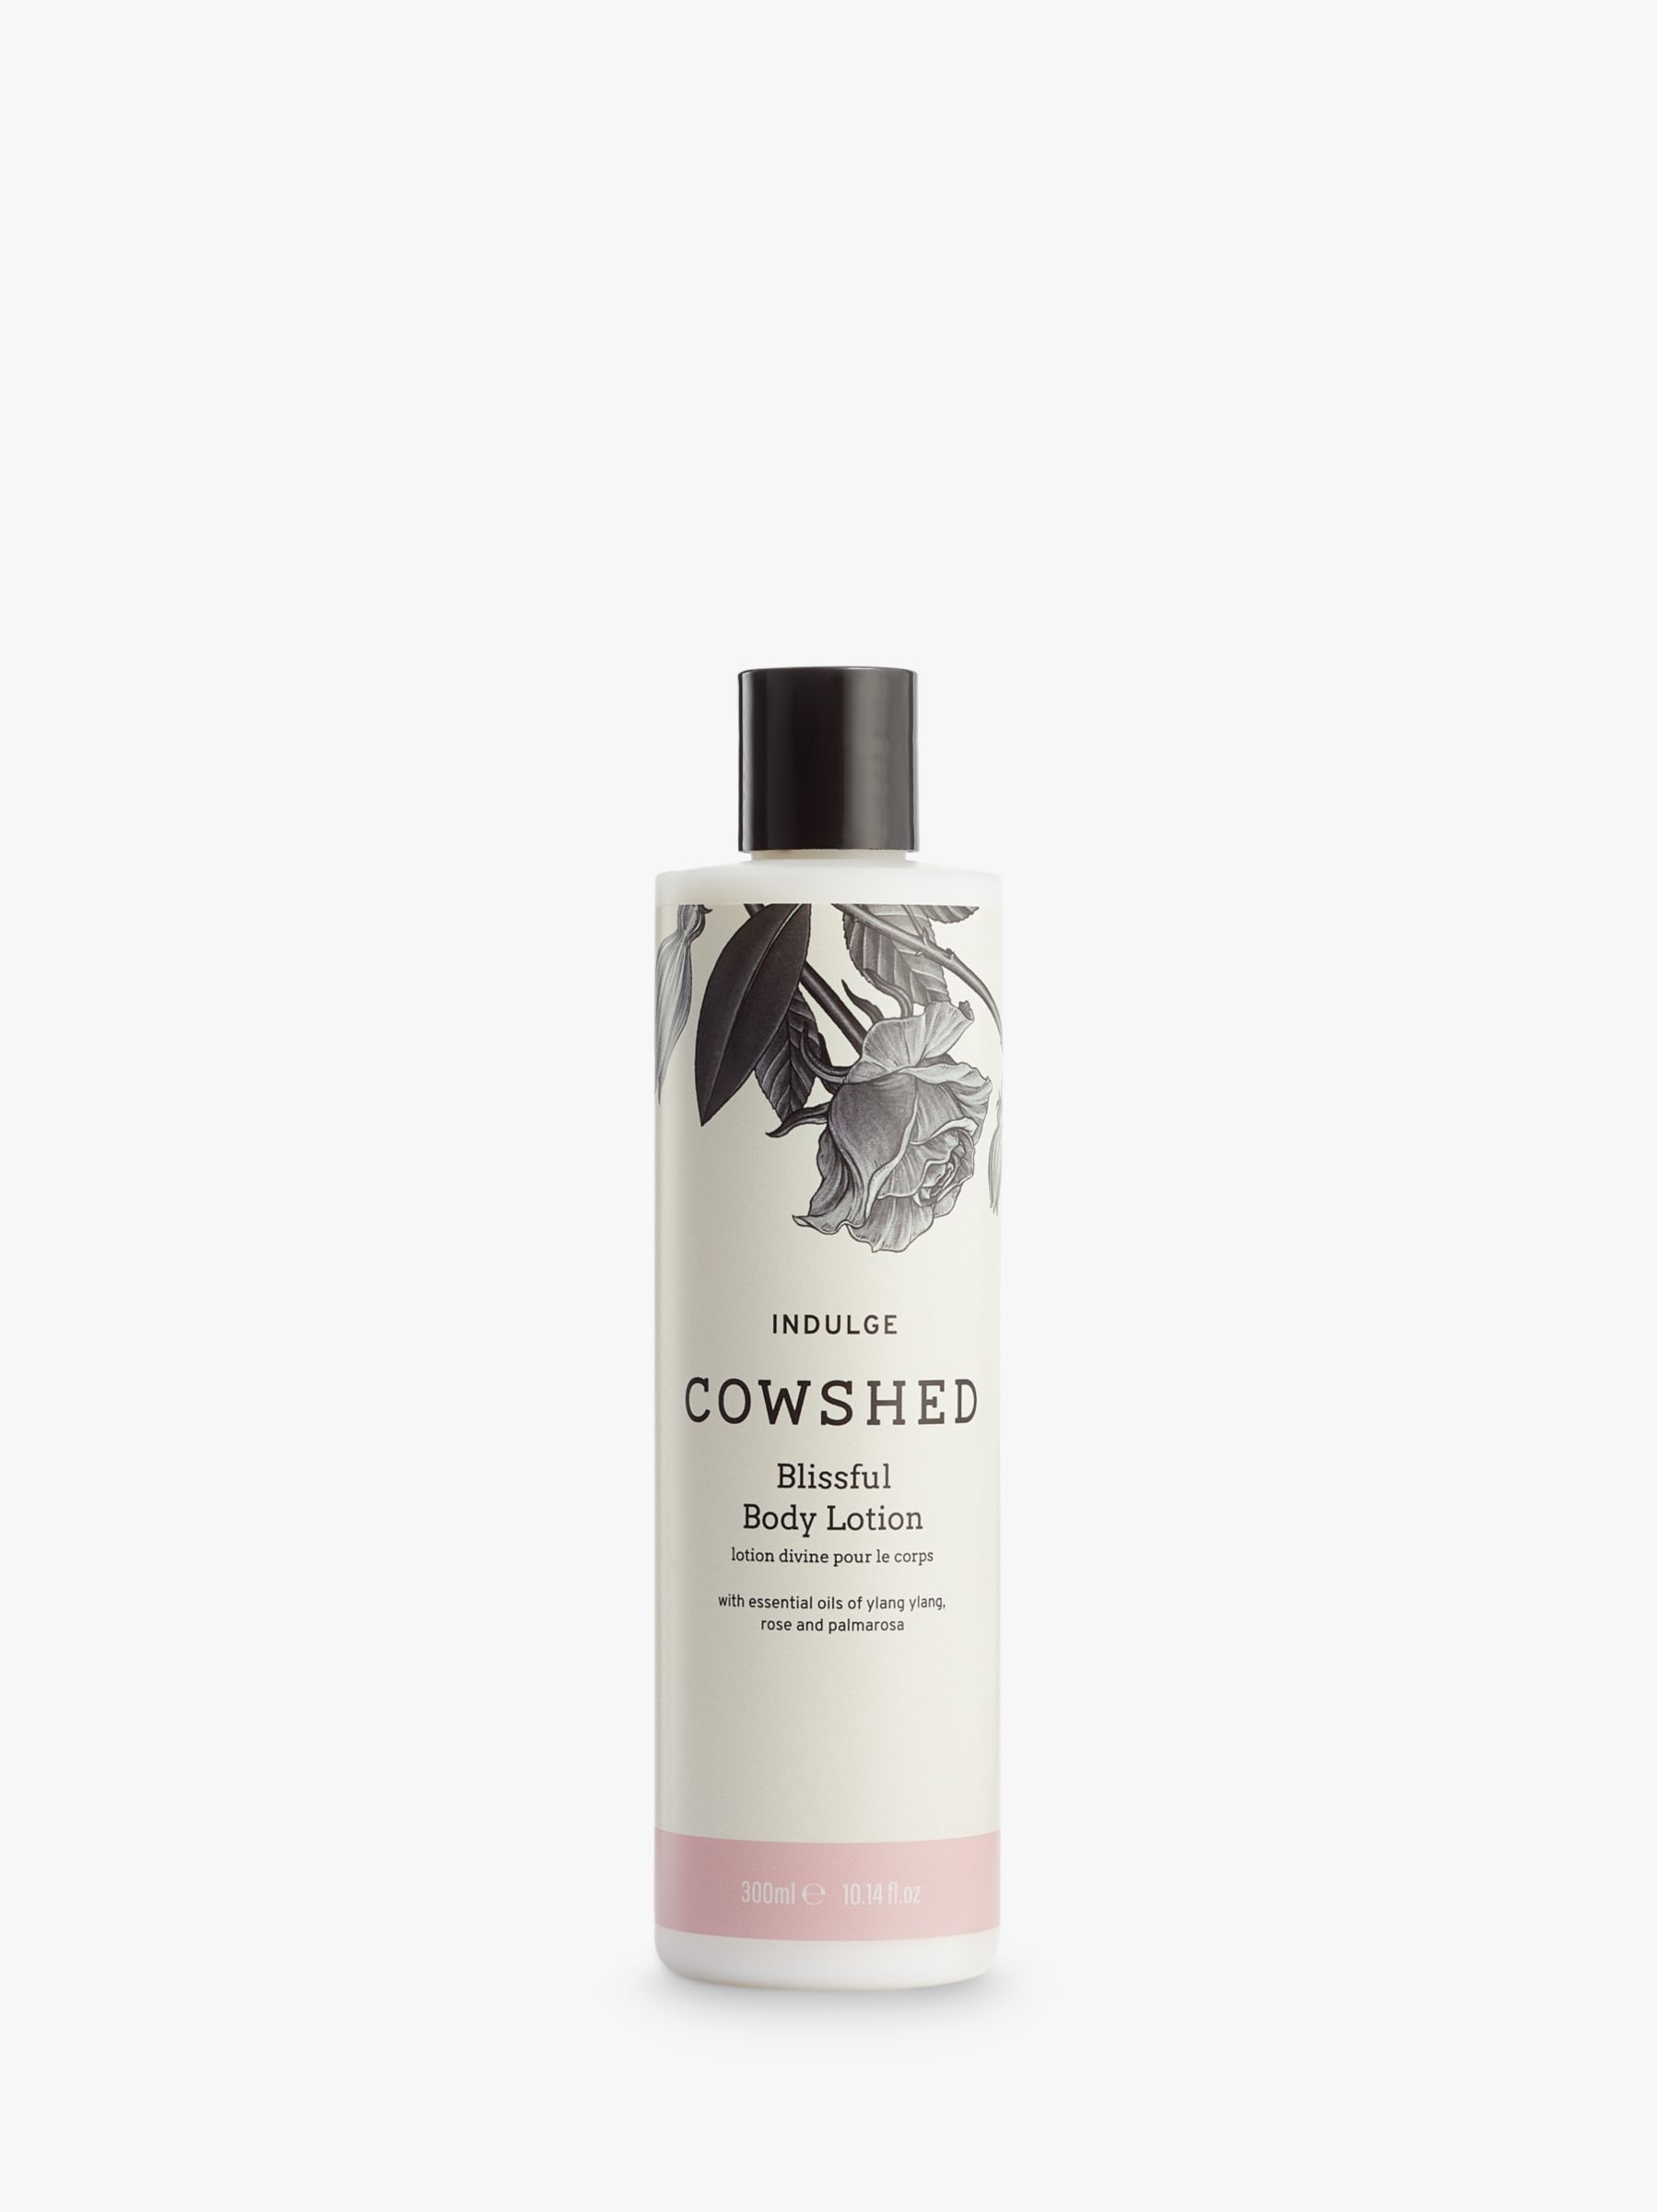 Cowshed Indulge Blissful Body Lotion, 300ml 1